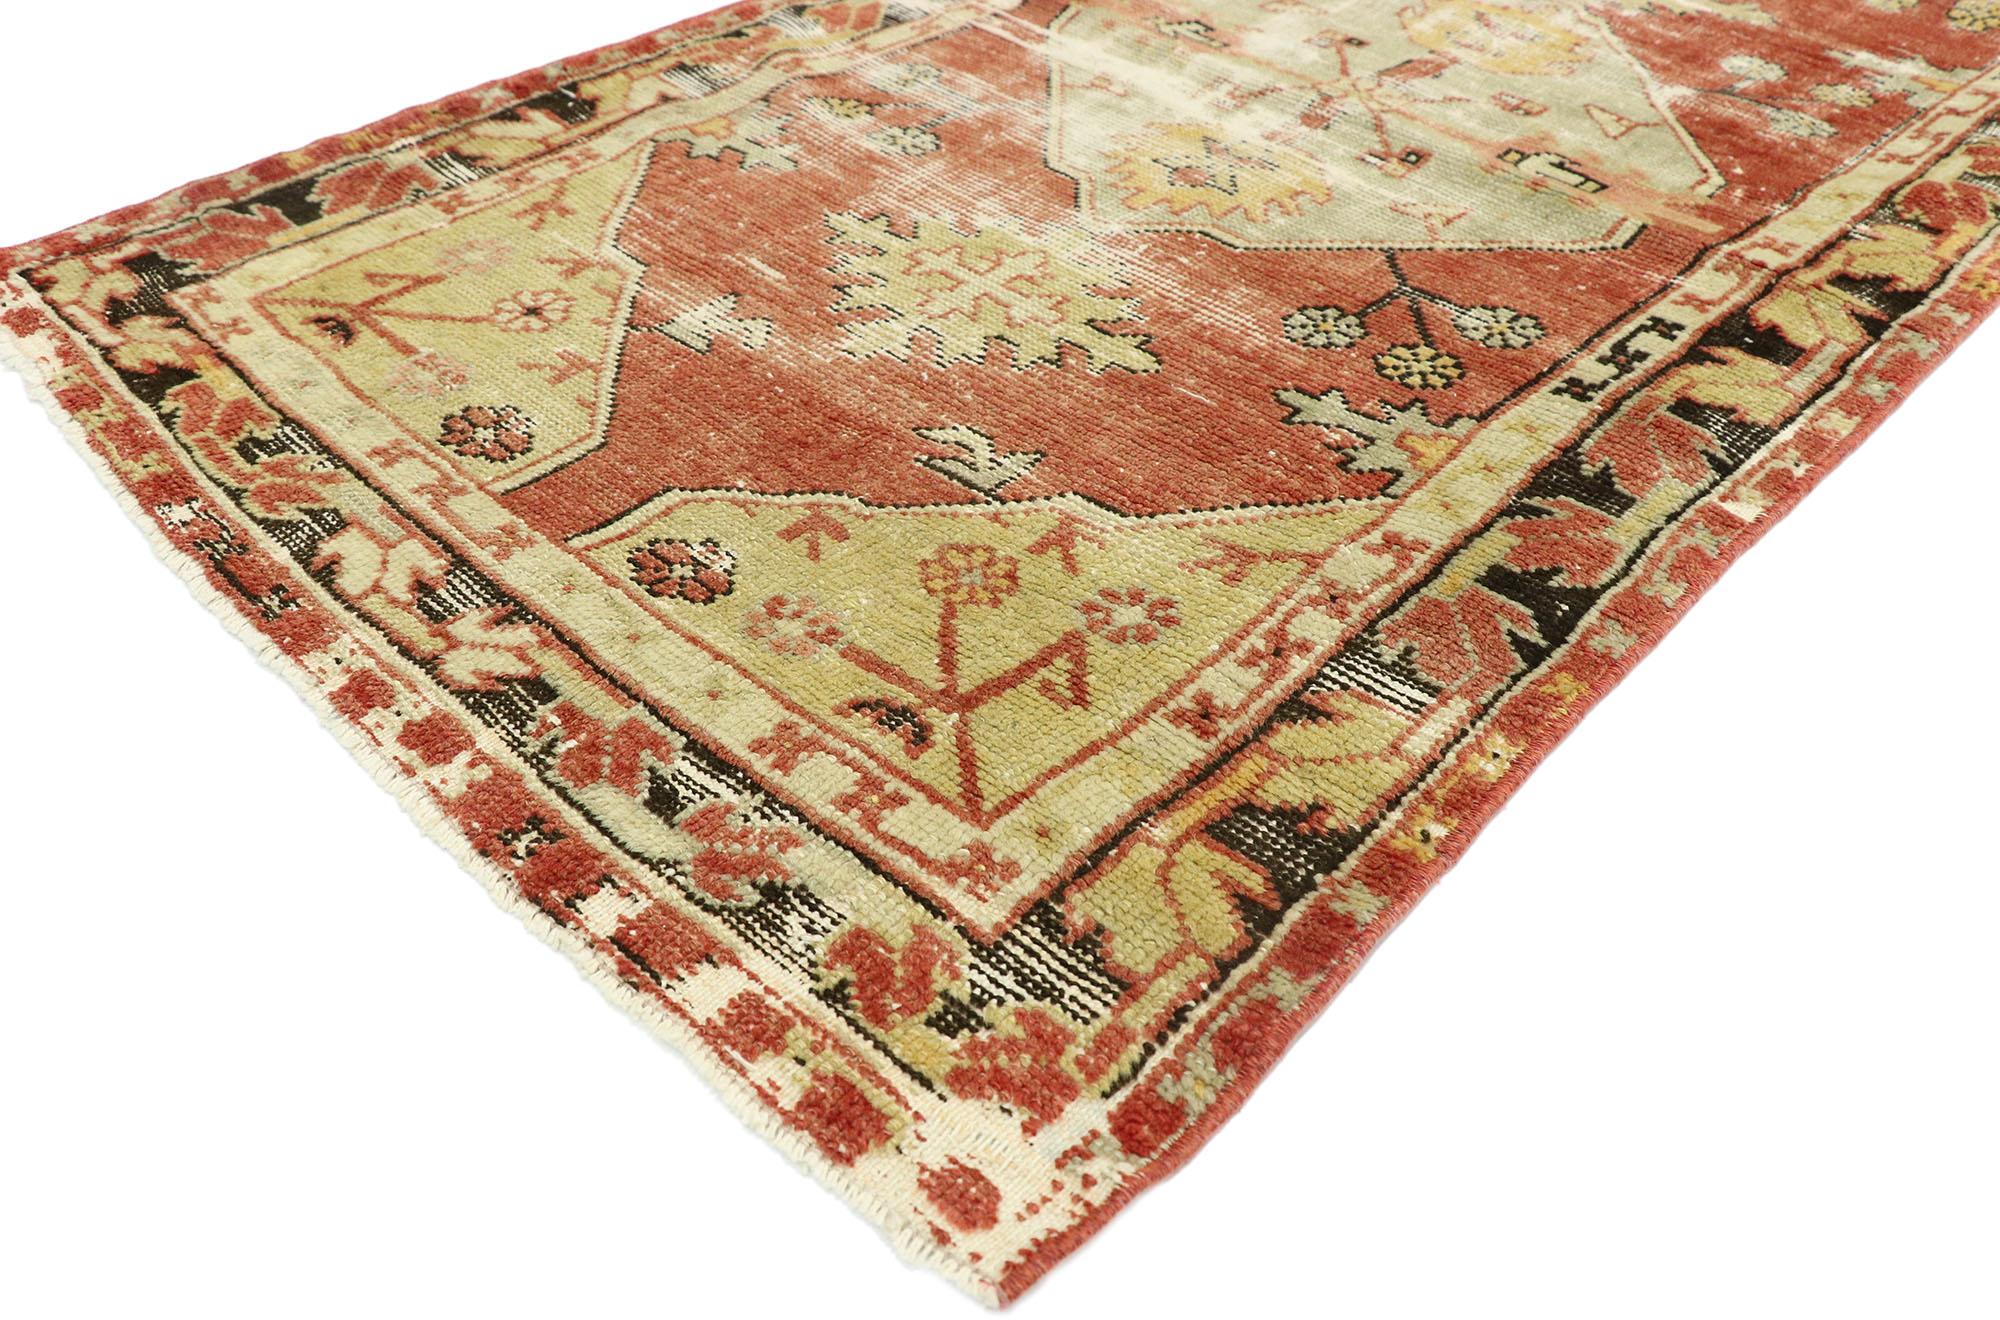 52780 Worn-In Distressed Vintage Turkish Oushak Runner with Rustic Lodge Style. This hand knotted wool distressed vintage Turkish Oushak runner features three large hexagonal medallions patterned with serrated palmettes and connected by small